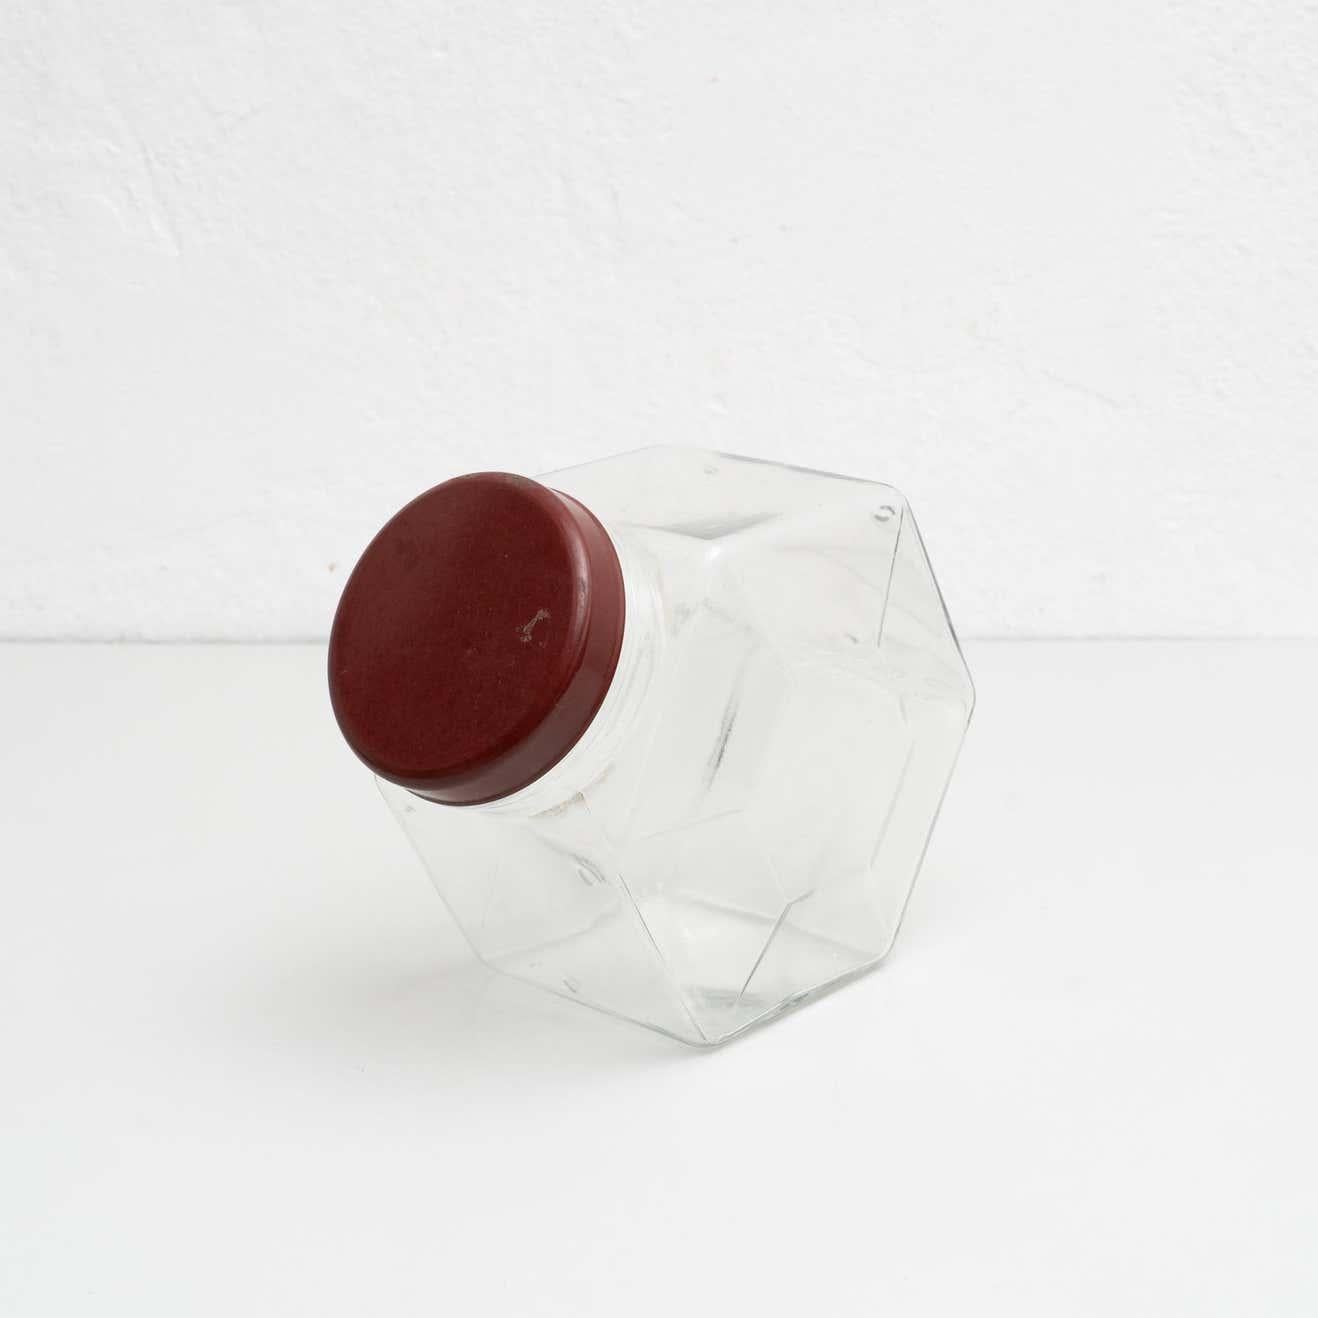 Antique Spanish glass container with a plastic cap. 

Made by unknown manufacturer in Spain, circa 1950.

In original condition, with minor wear consistent with age and use, preserving a beautiful patina.

Materials:
Glass
Plastic.

